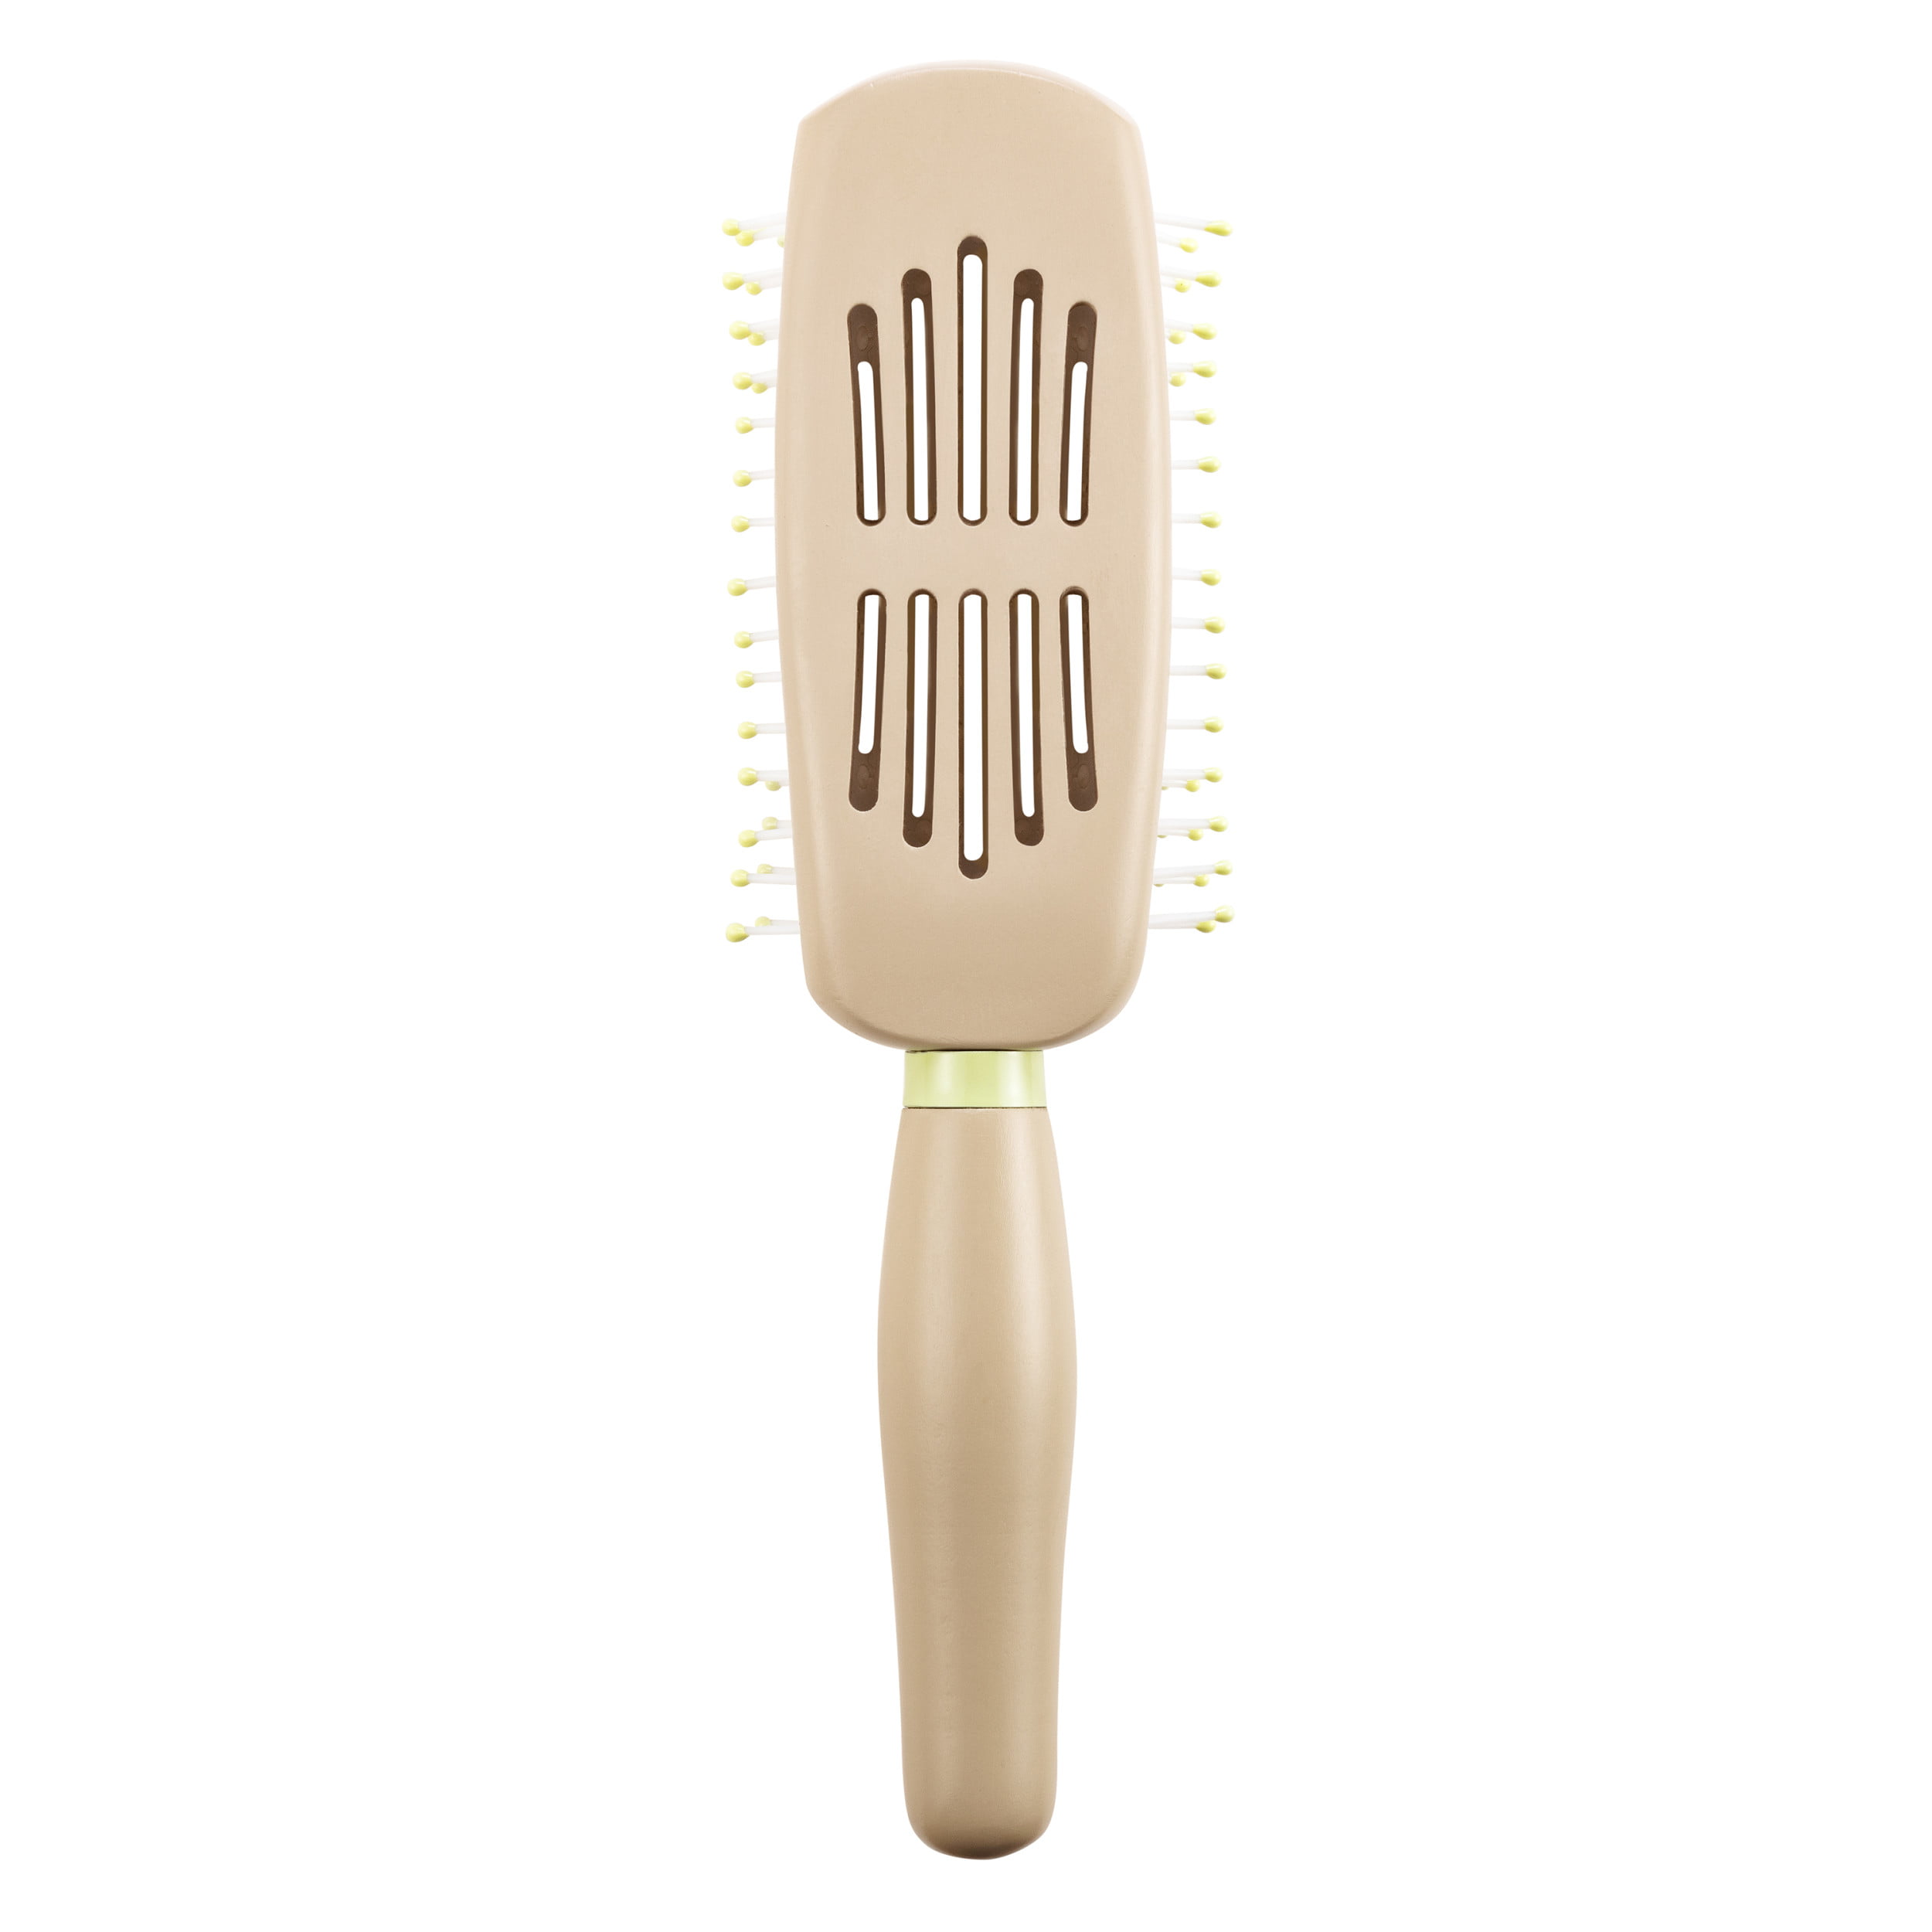 EcoTools Volumizing Round Hairbrush, Heat Resistant For Effortless Blow  Drying, Vegan Boar Bristles Tame Frizz, Blowout & Smooth Hair, Renewable  Bamboo, Cruelty-Free, 1 Count – EcoTools Beauty